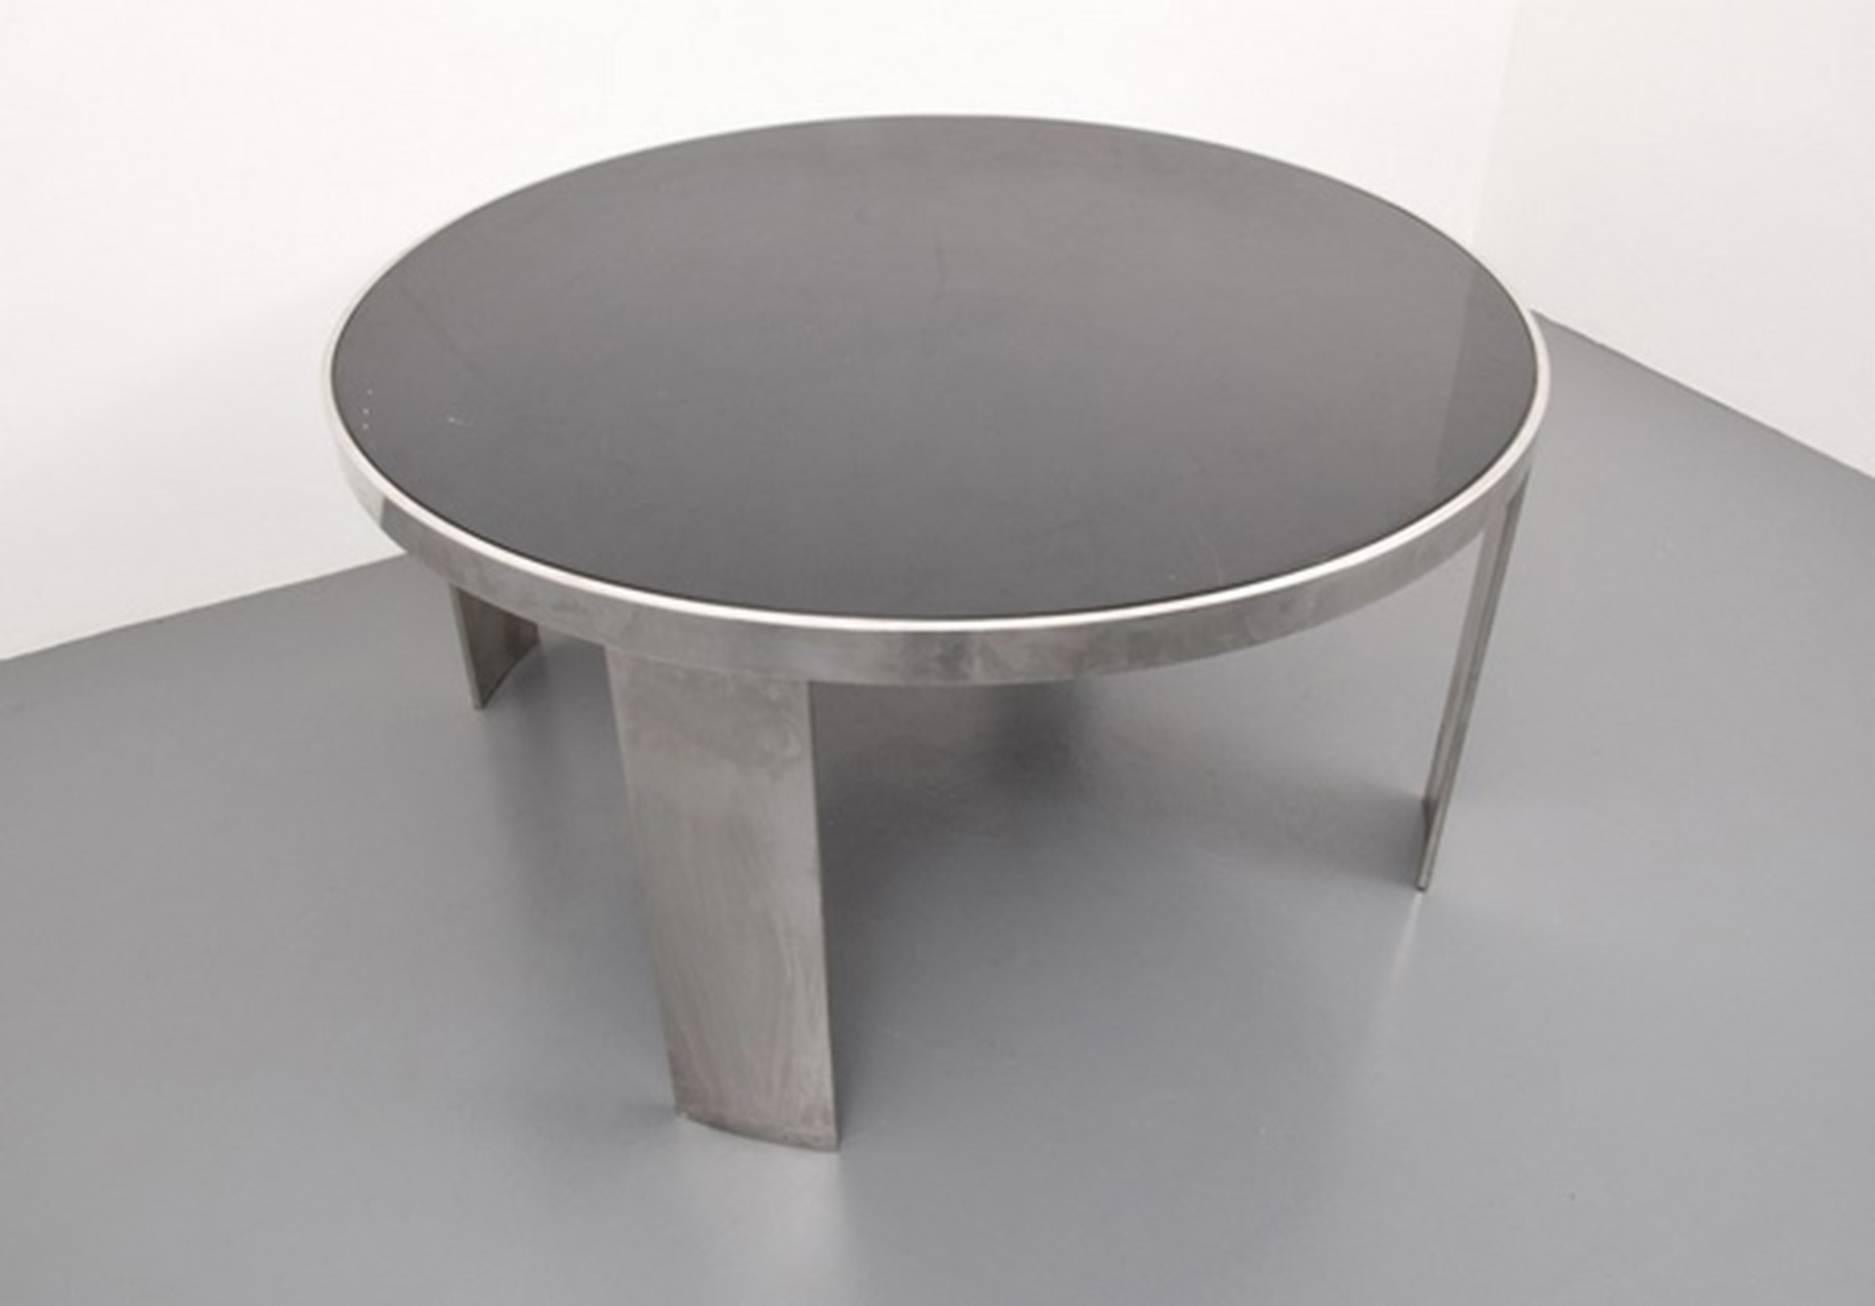 Very nice Mid-Century Modern dining table. The finish appears to be chromed metal, enameled wood or possibly plastic.